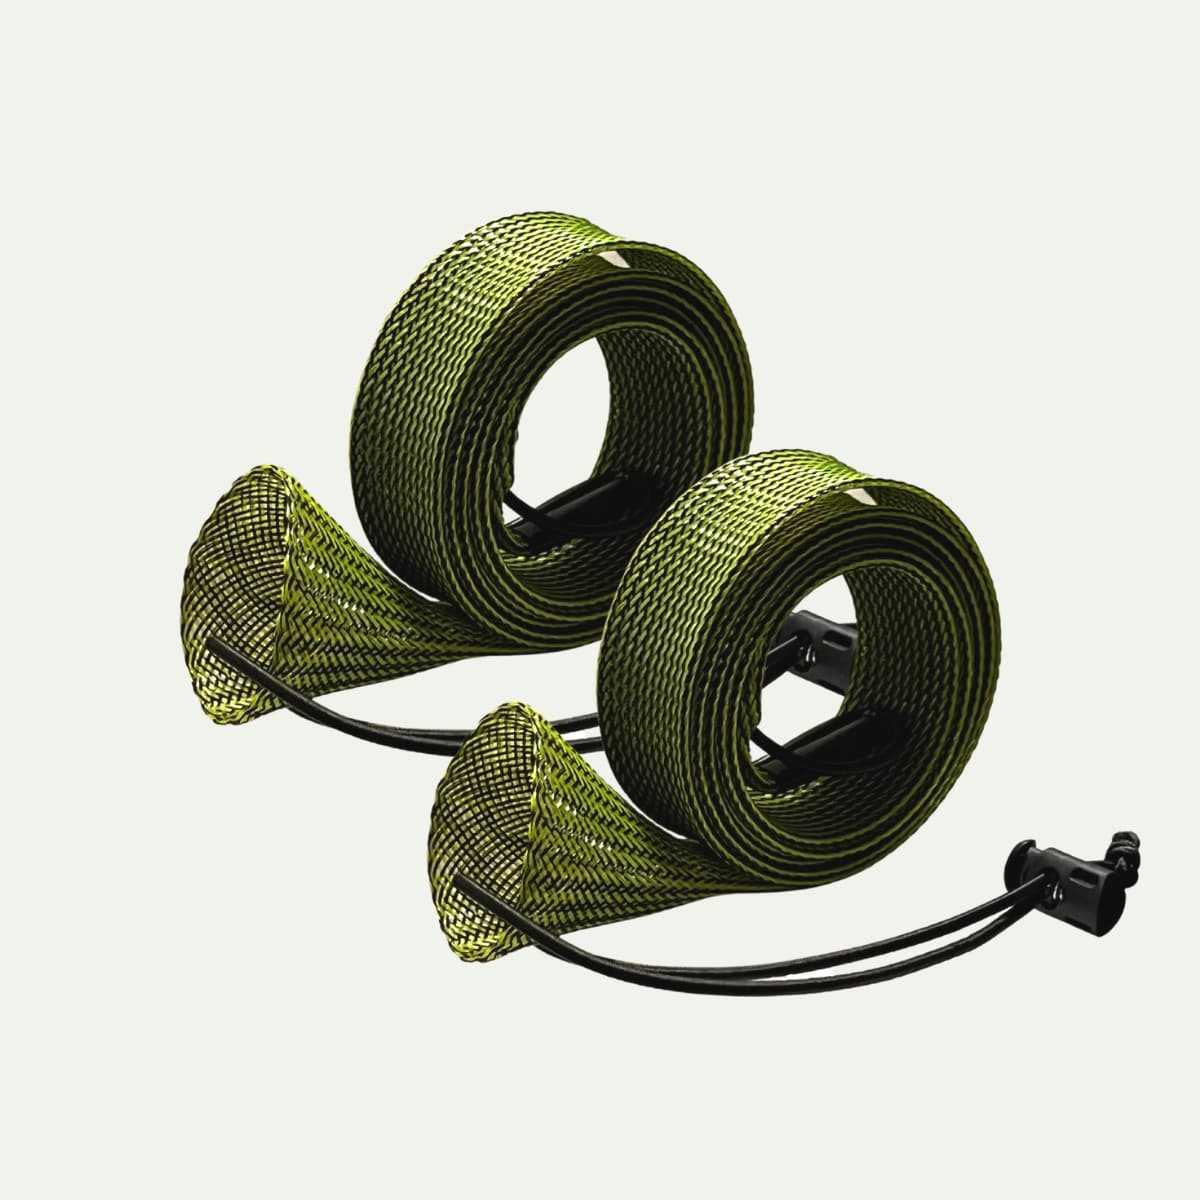 Fishing Rod Protective Sleeves manufacturer, Buy good quality